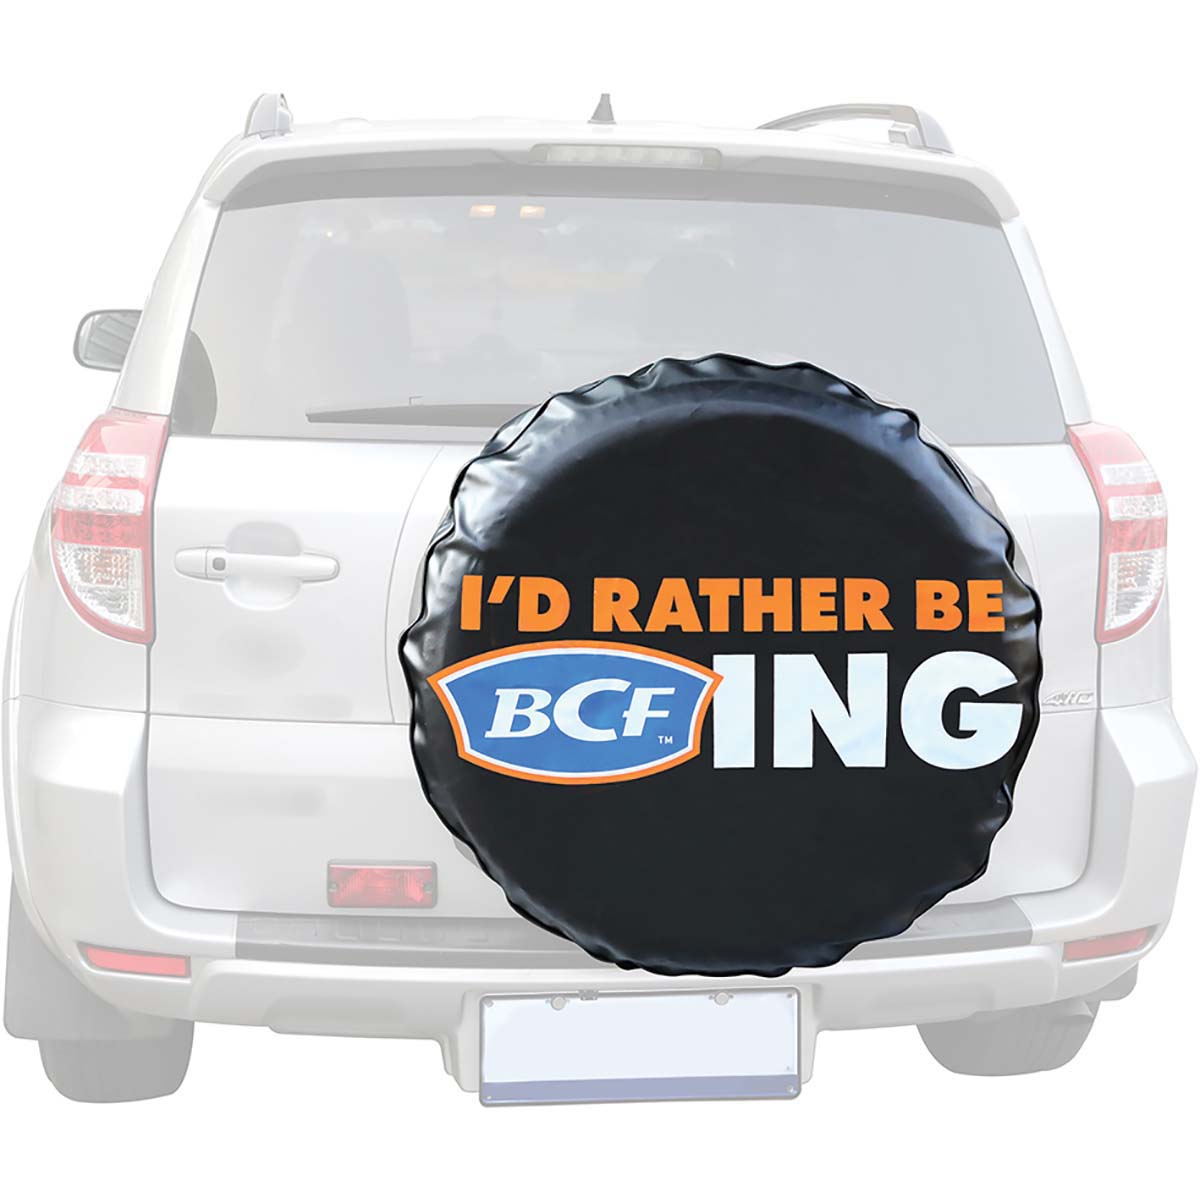 BCF 4WD and Caravan Wheel Cover Small